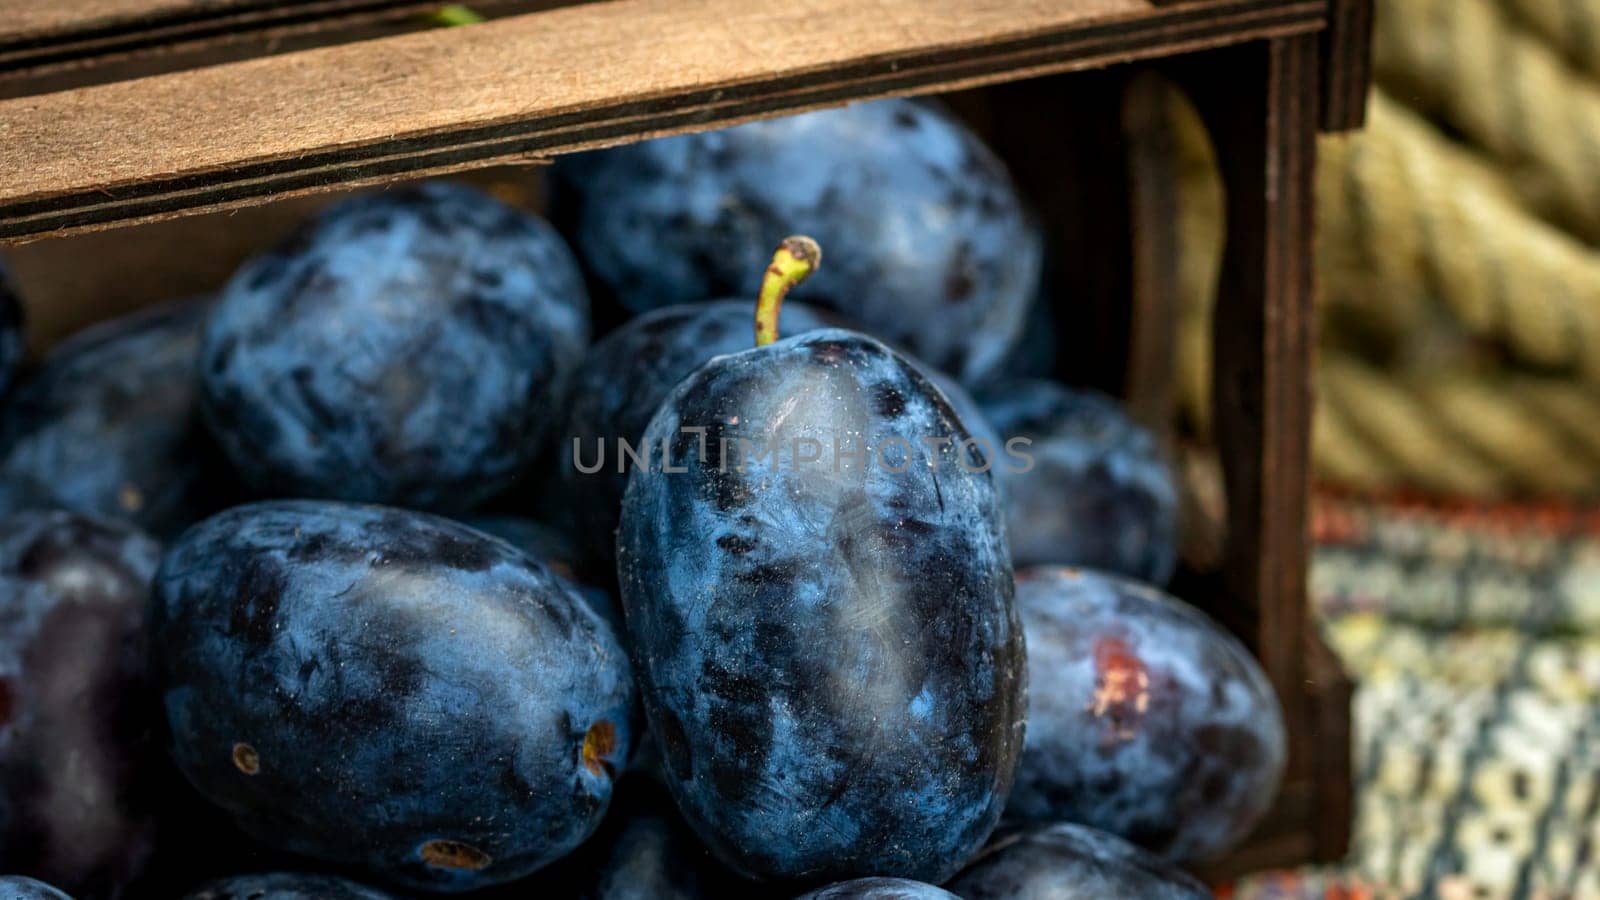 Ripe blue plums in a wooden crate in a rustic composition.  by vladispas